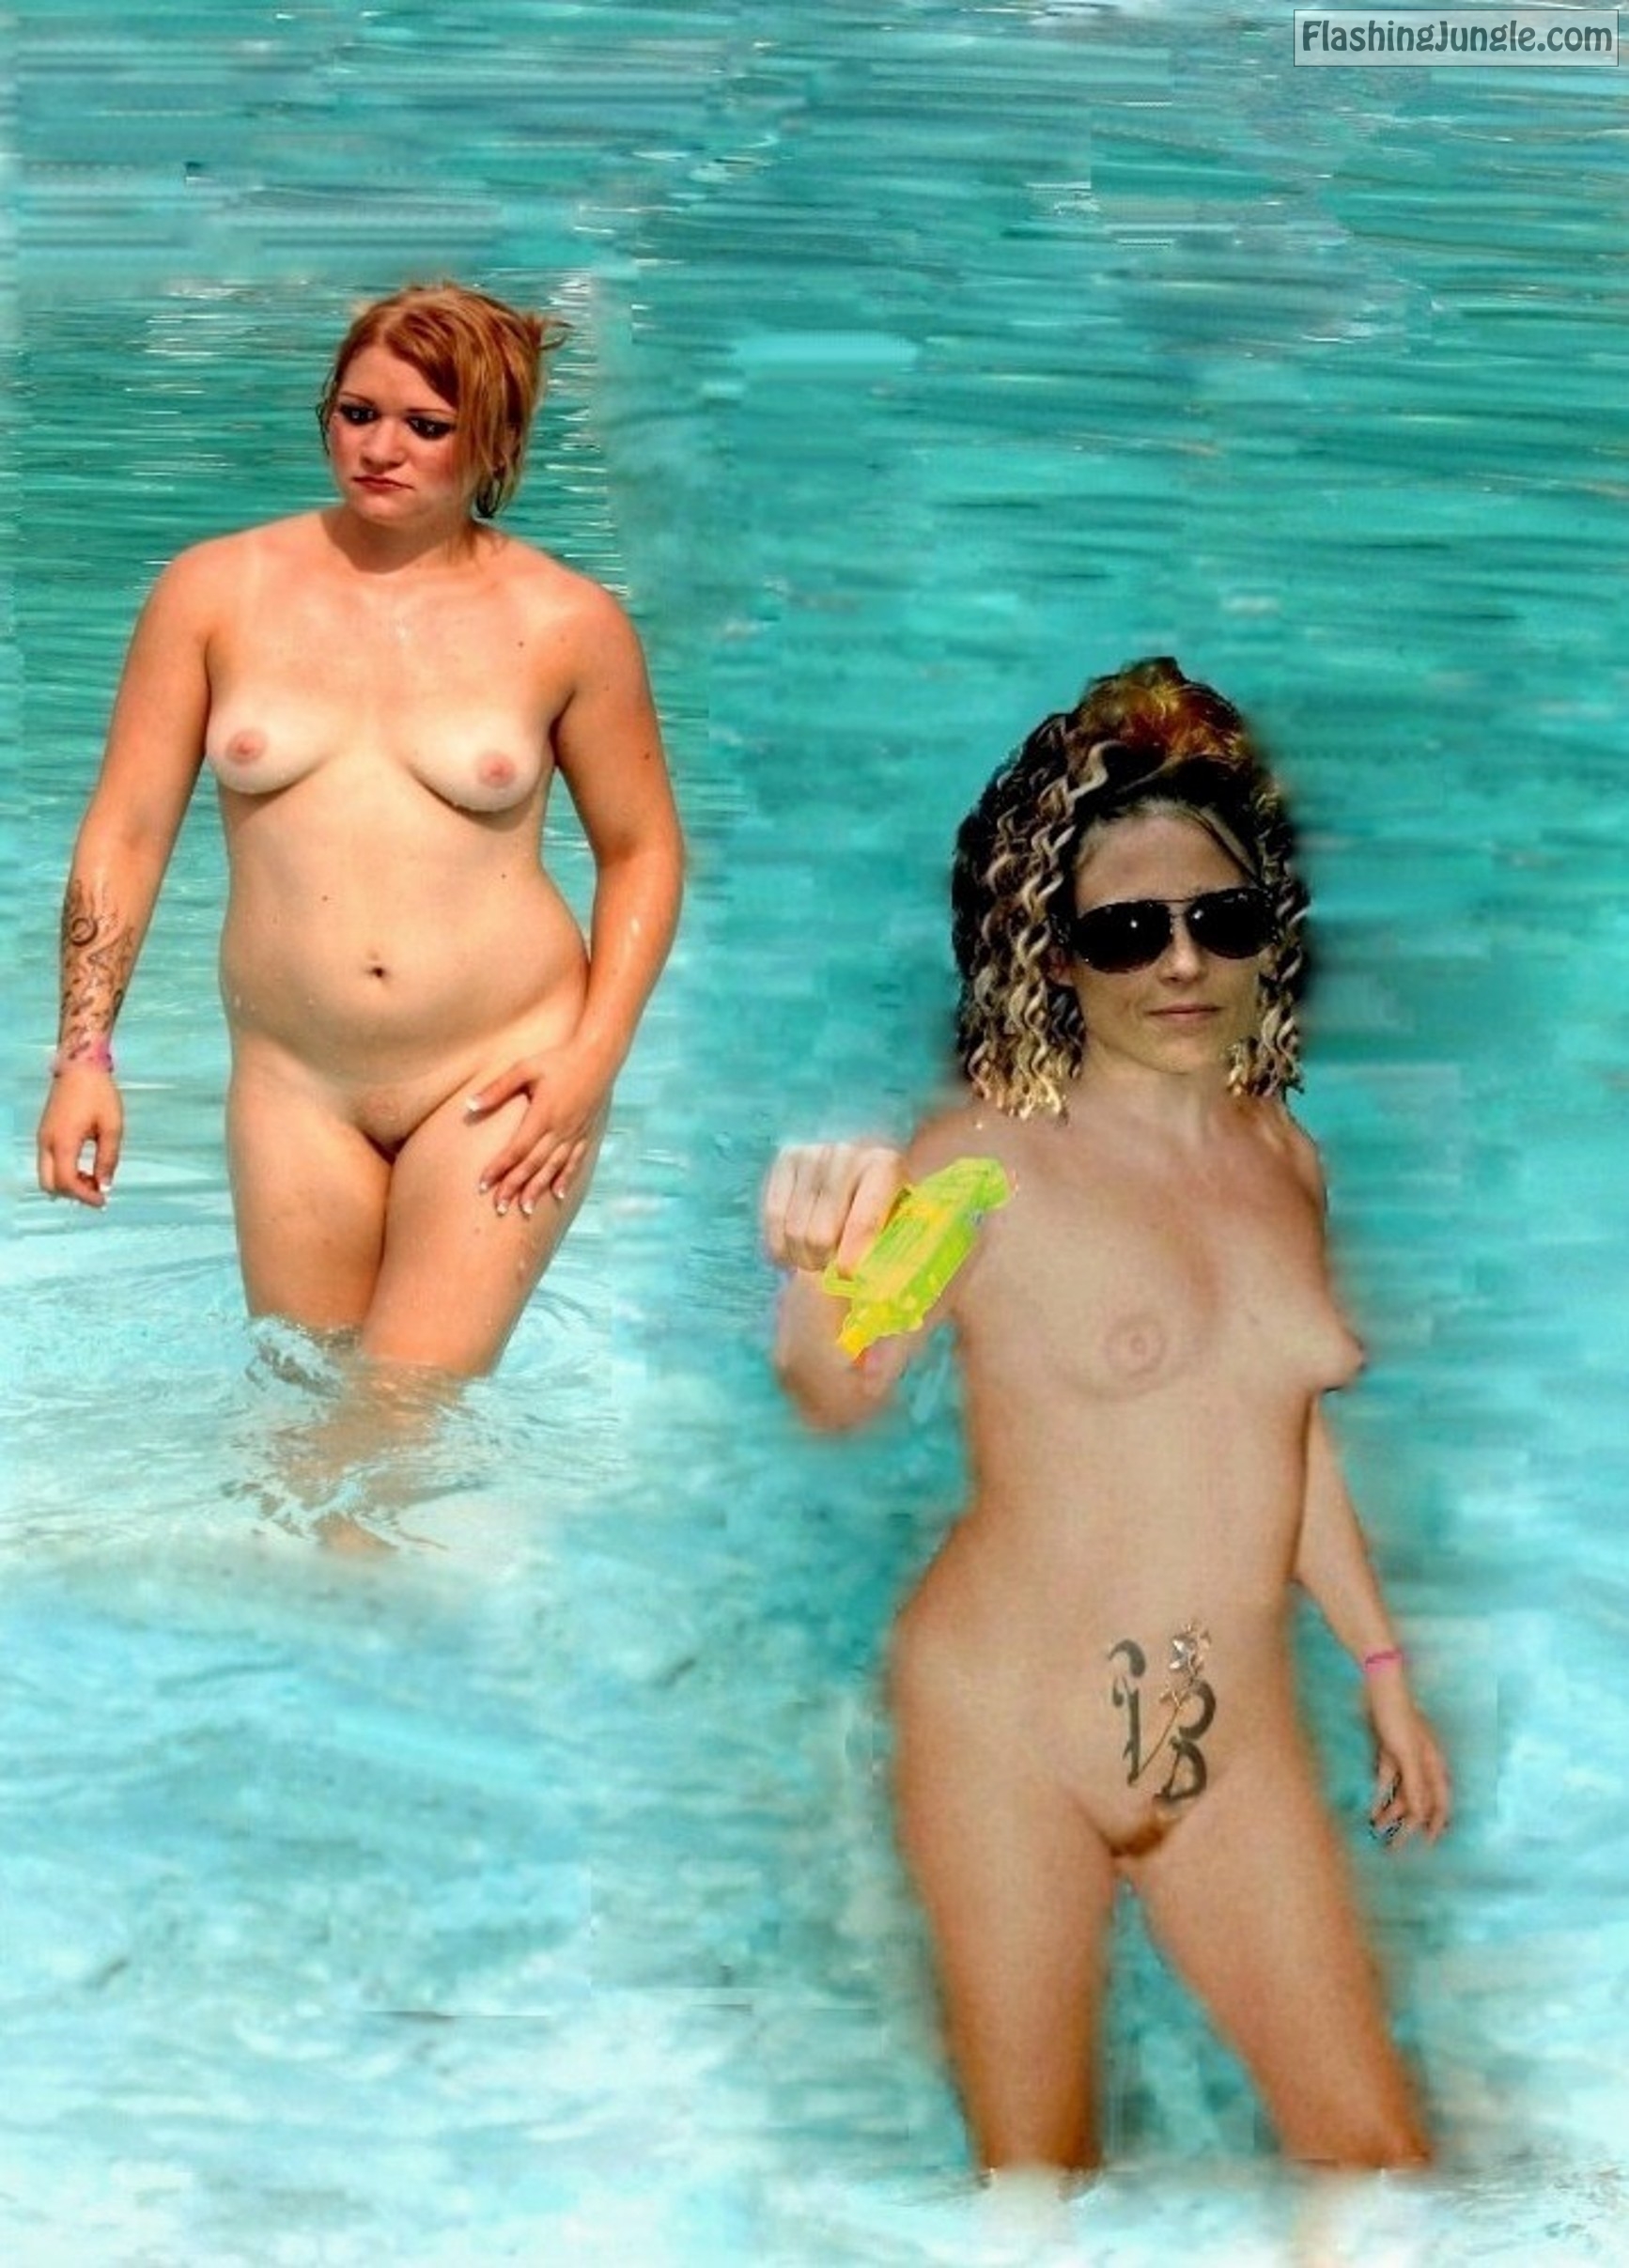 Real Amateurs - Friends in the Pool – Awful Photoshop Fake